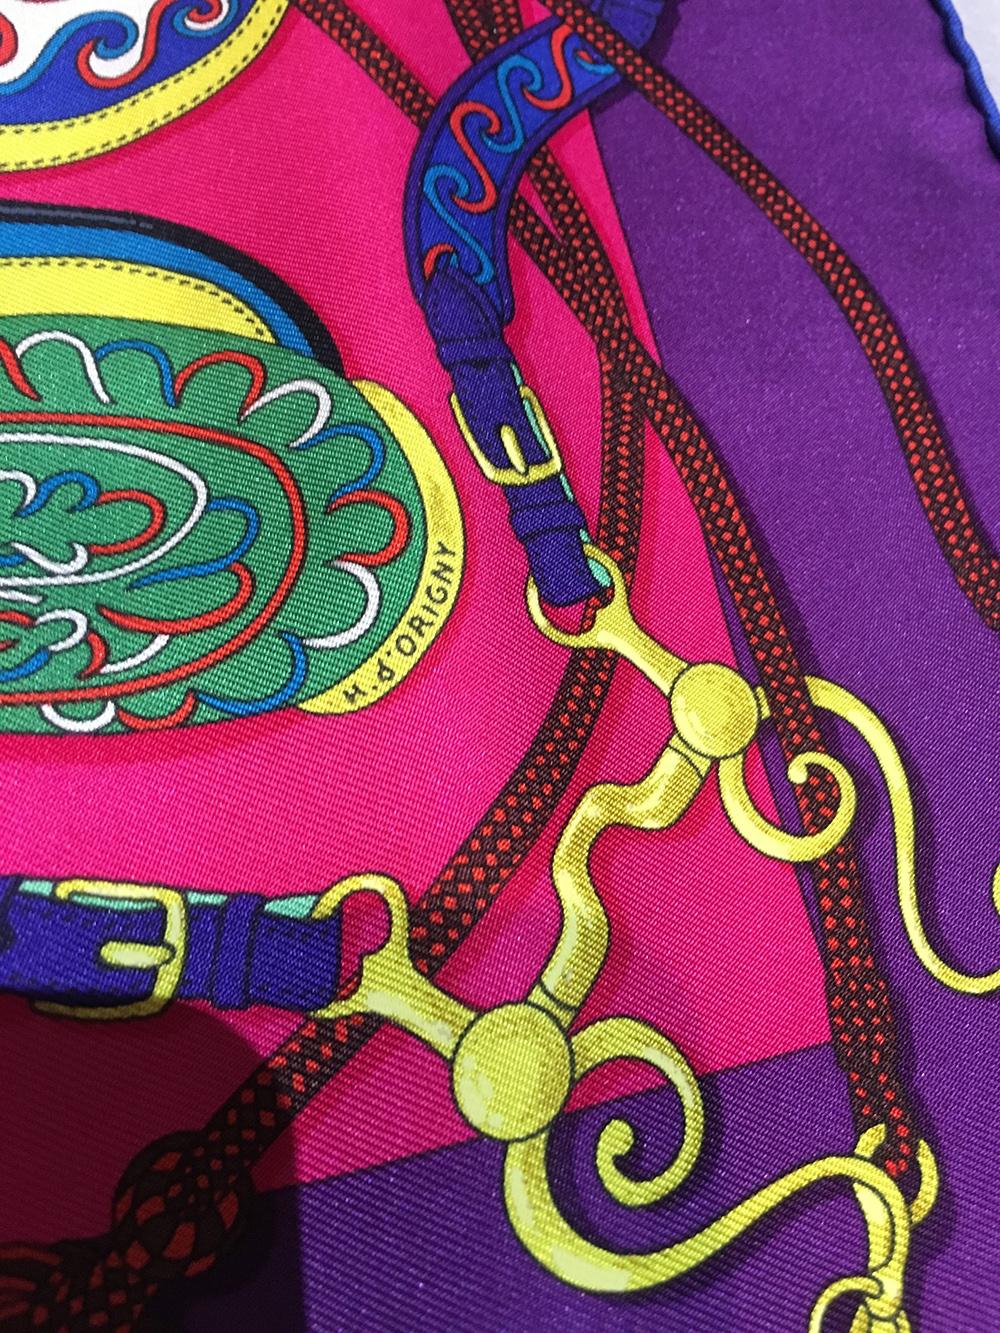 Hermes Festival des Amazones Silk Pocket Square in excellent condition. Original silk screen design c1992 by Henri d’Origny features a colorful assortment of horse saddles in orange, green, blue with yellow and red accents over a fuchsia pink